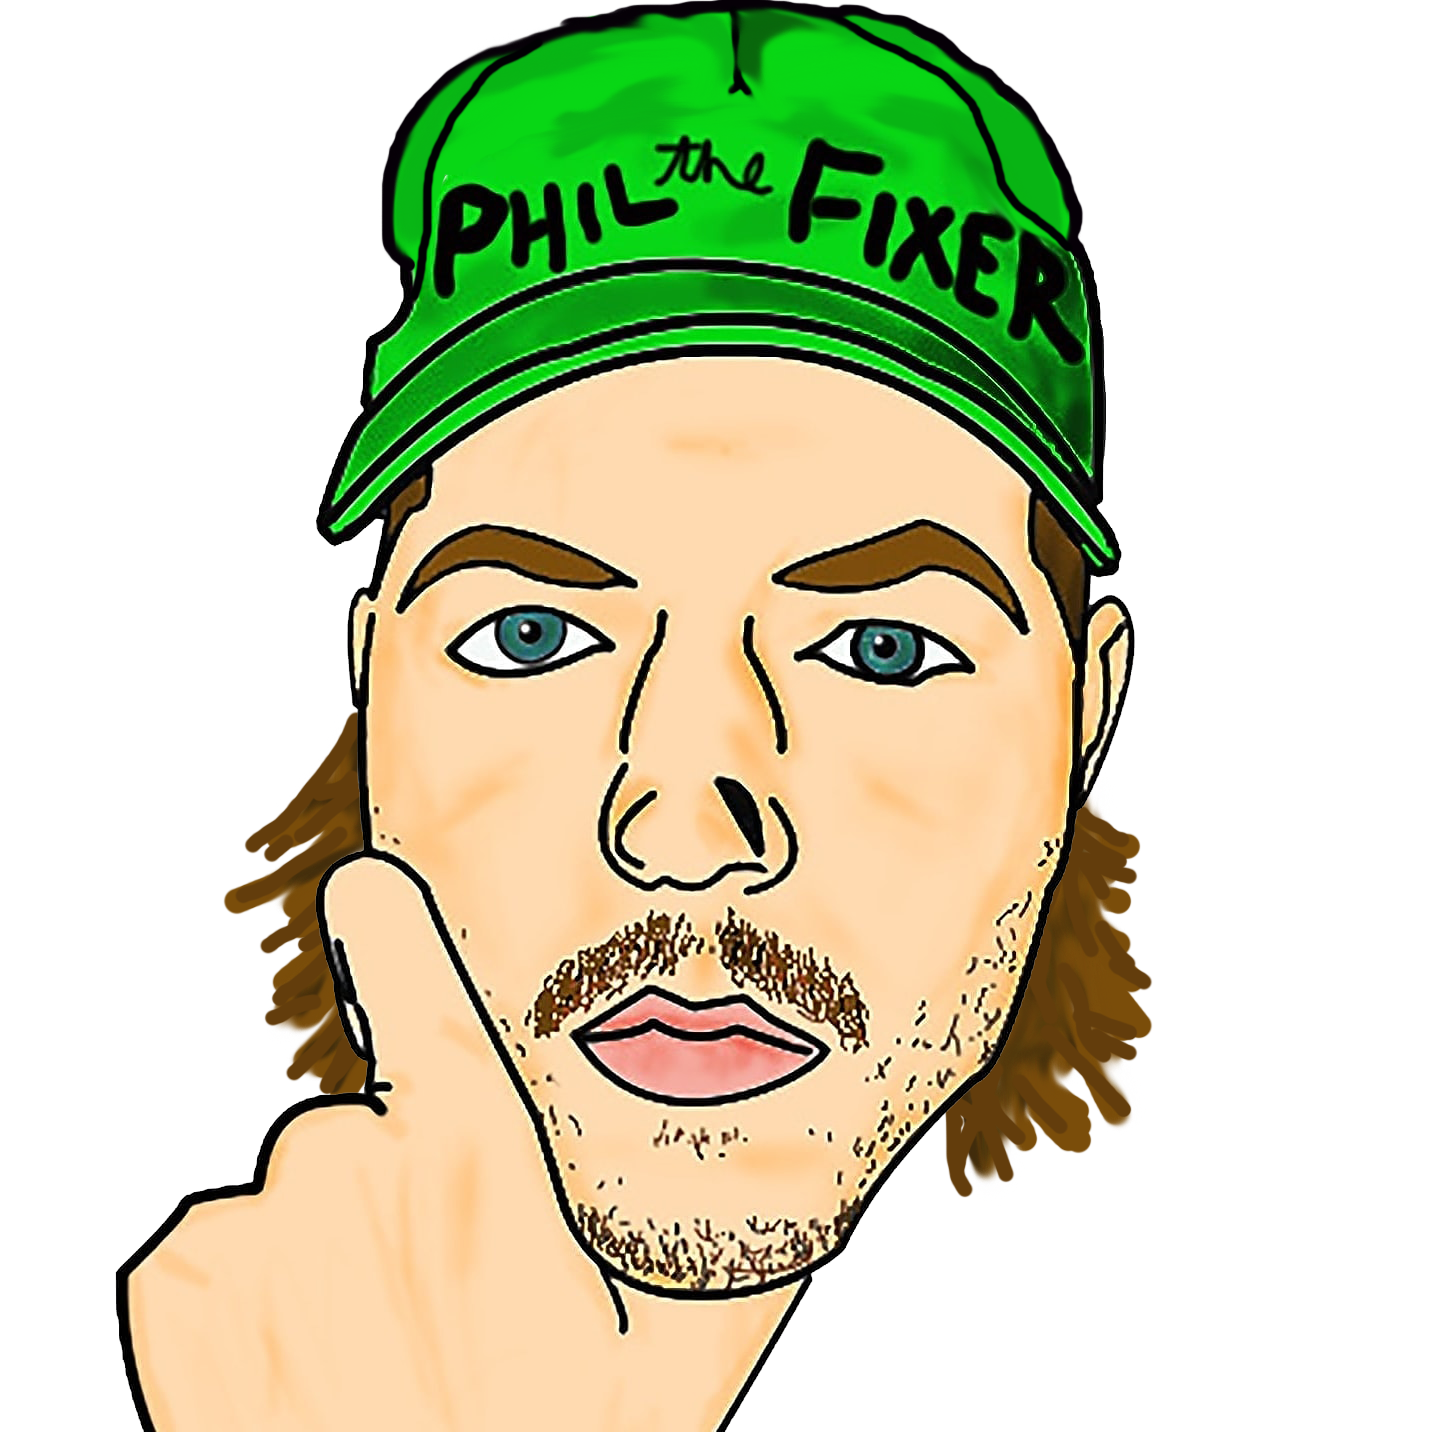 Phil the Fixer Media and Consulting